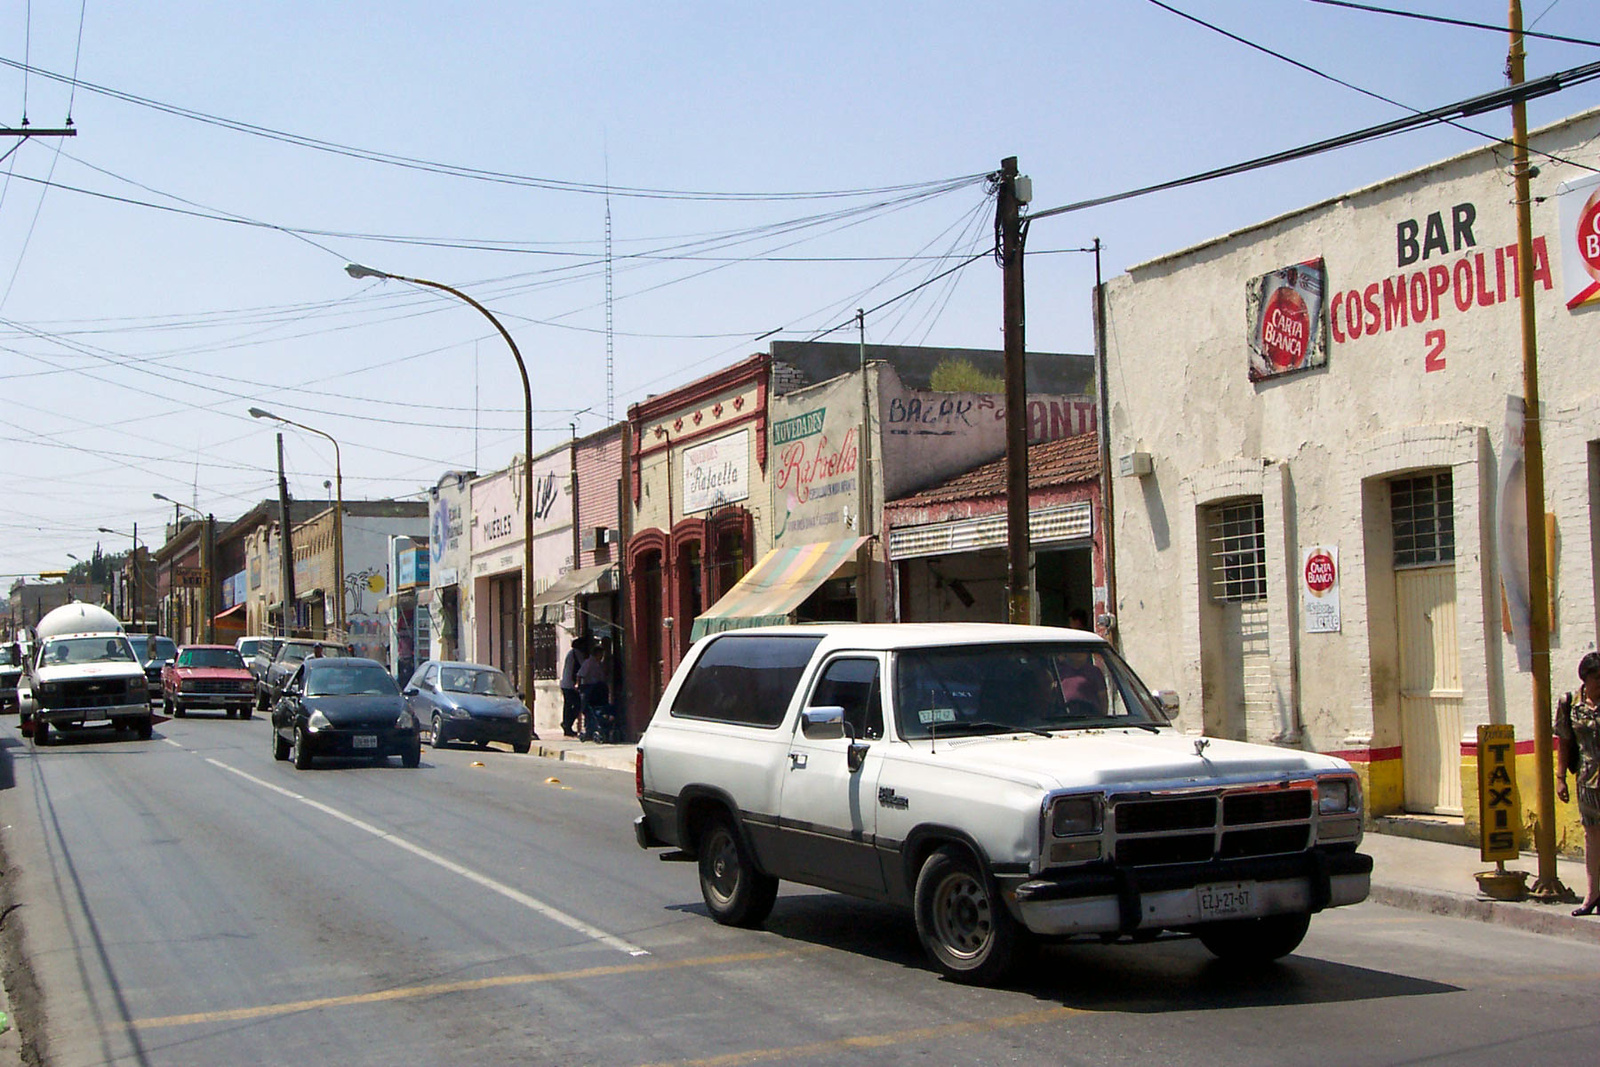 Mexican street